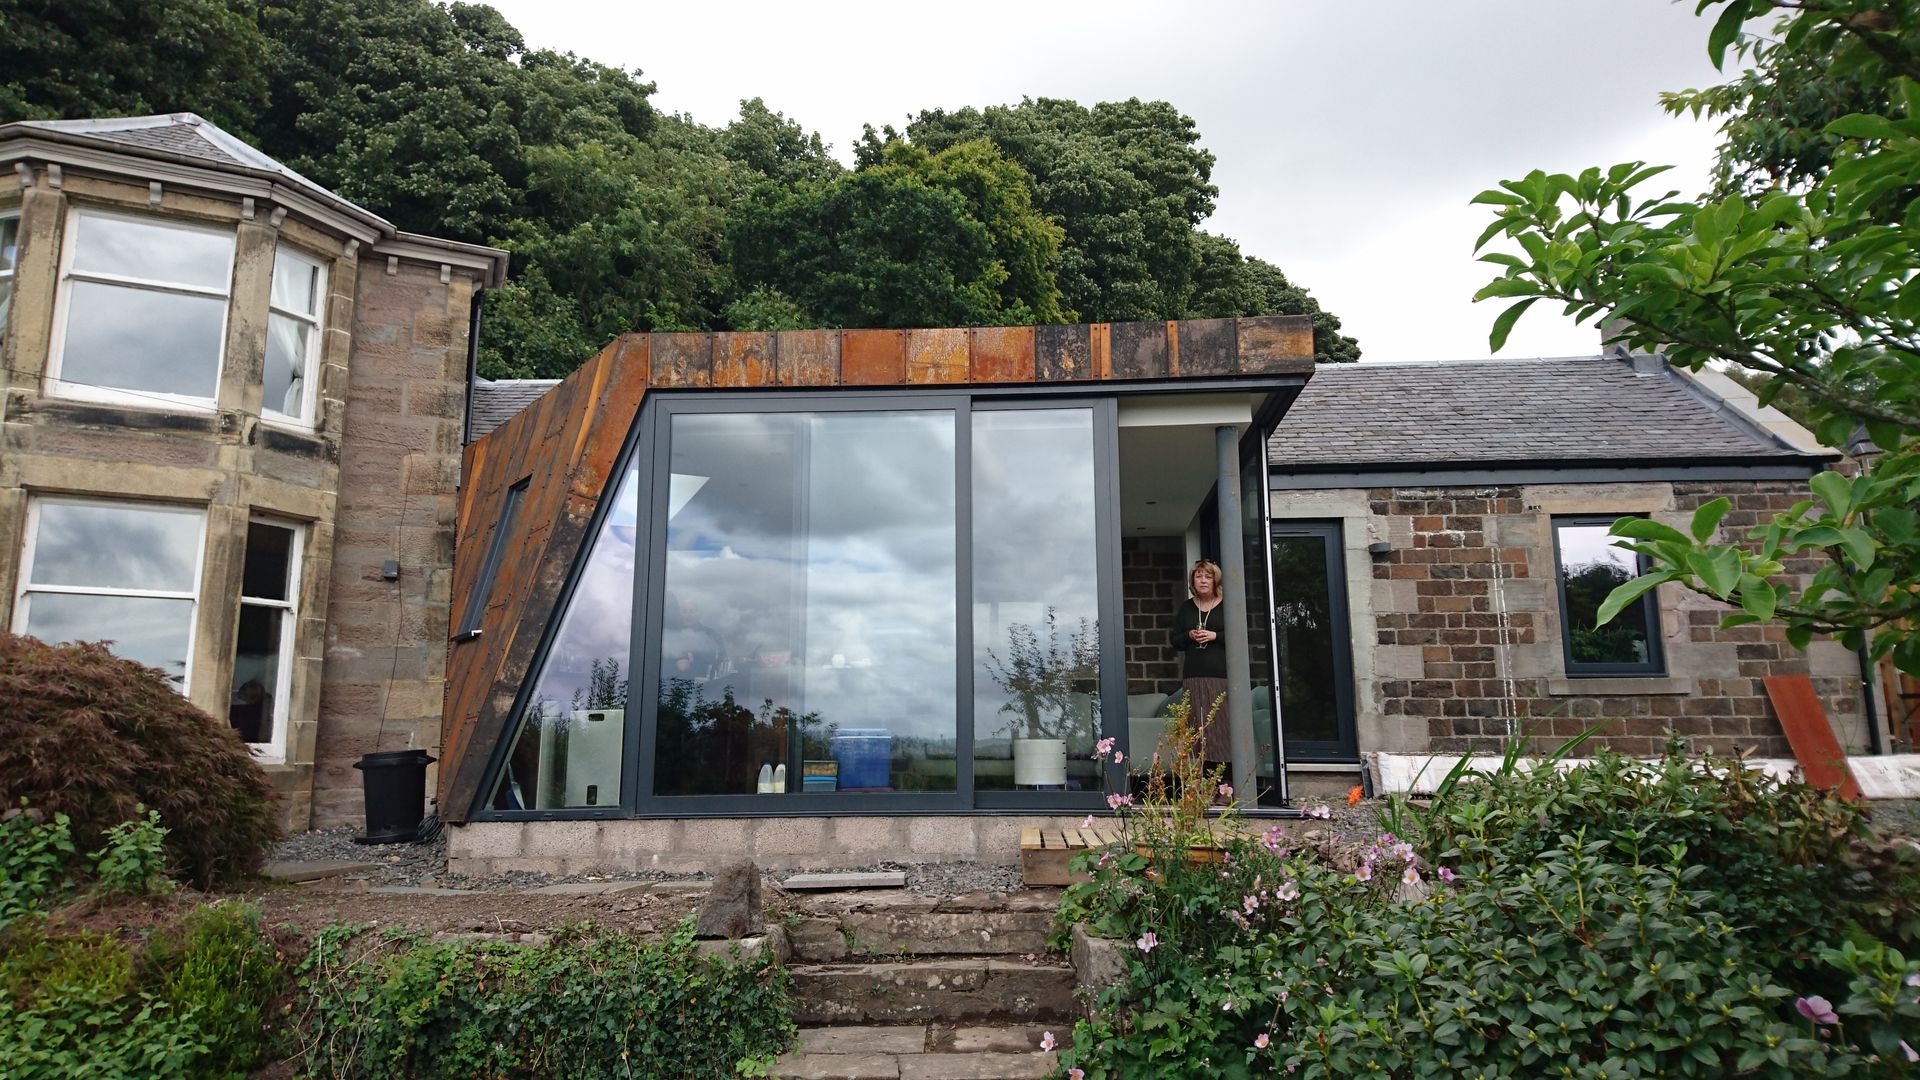 Large sliding doors allow the corner to fold away creating a stronger connection between inside and out. Woodside Parker Kirk Architects Maisons modernes Fer / Acier Glass sliding doors,Corten steel cladding,extension,old meets new,Garden,Extension